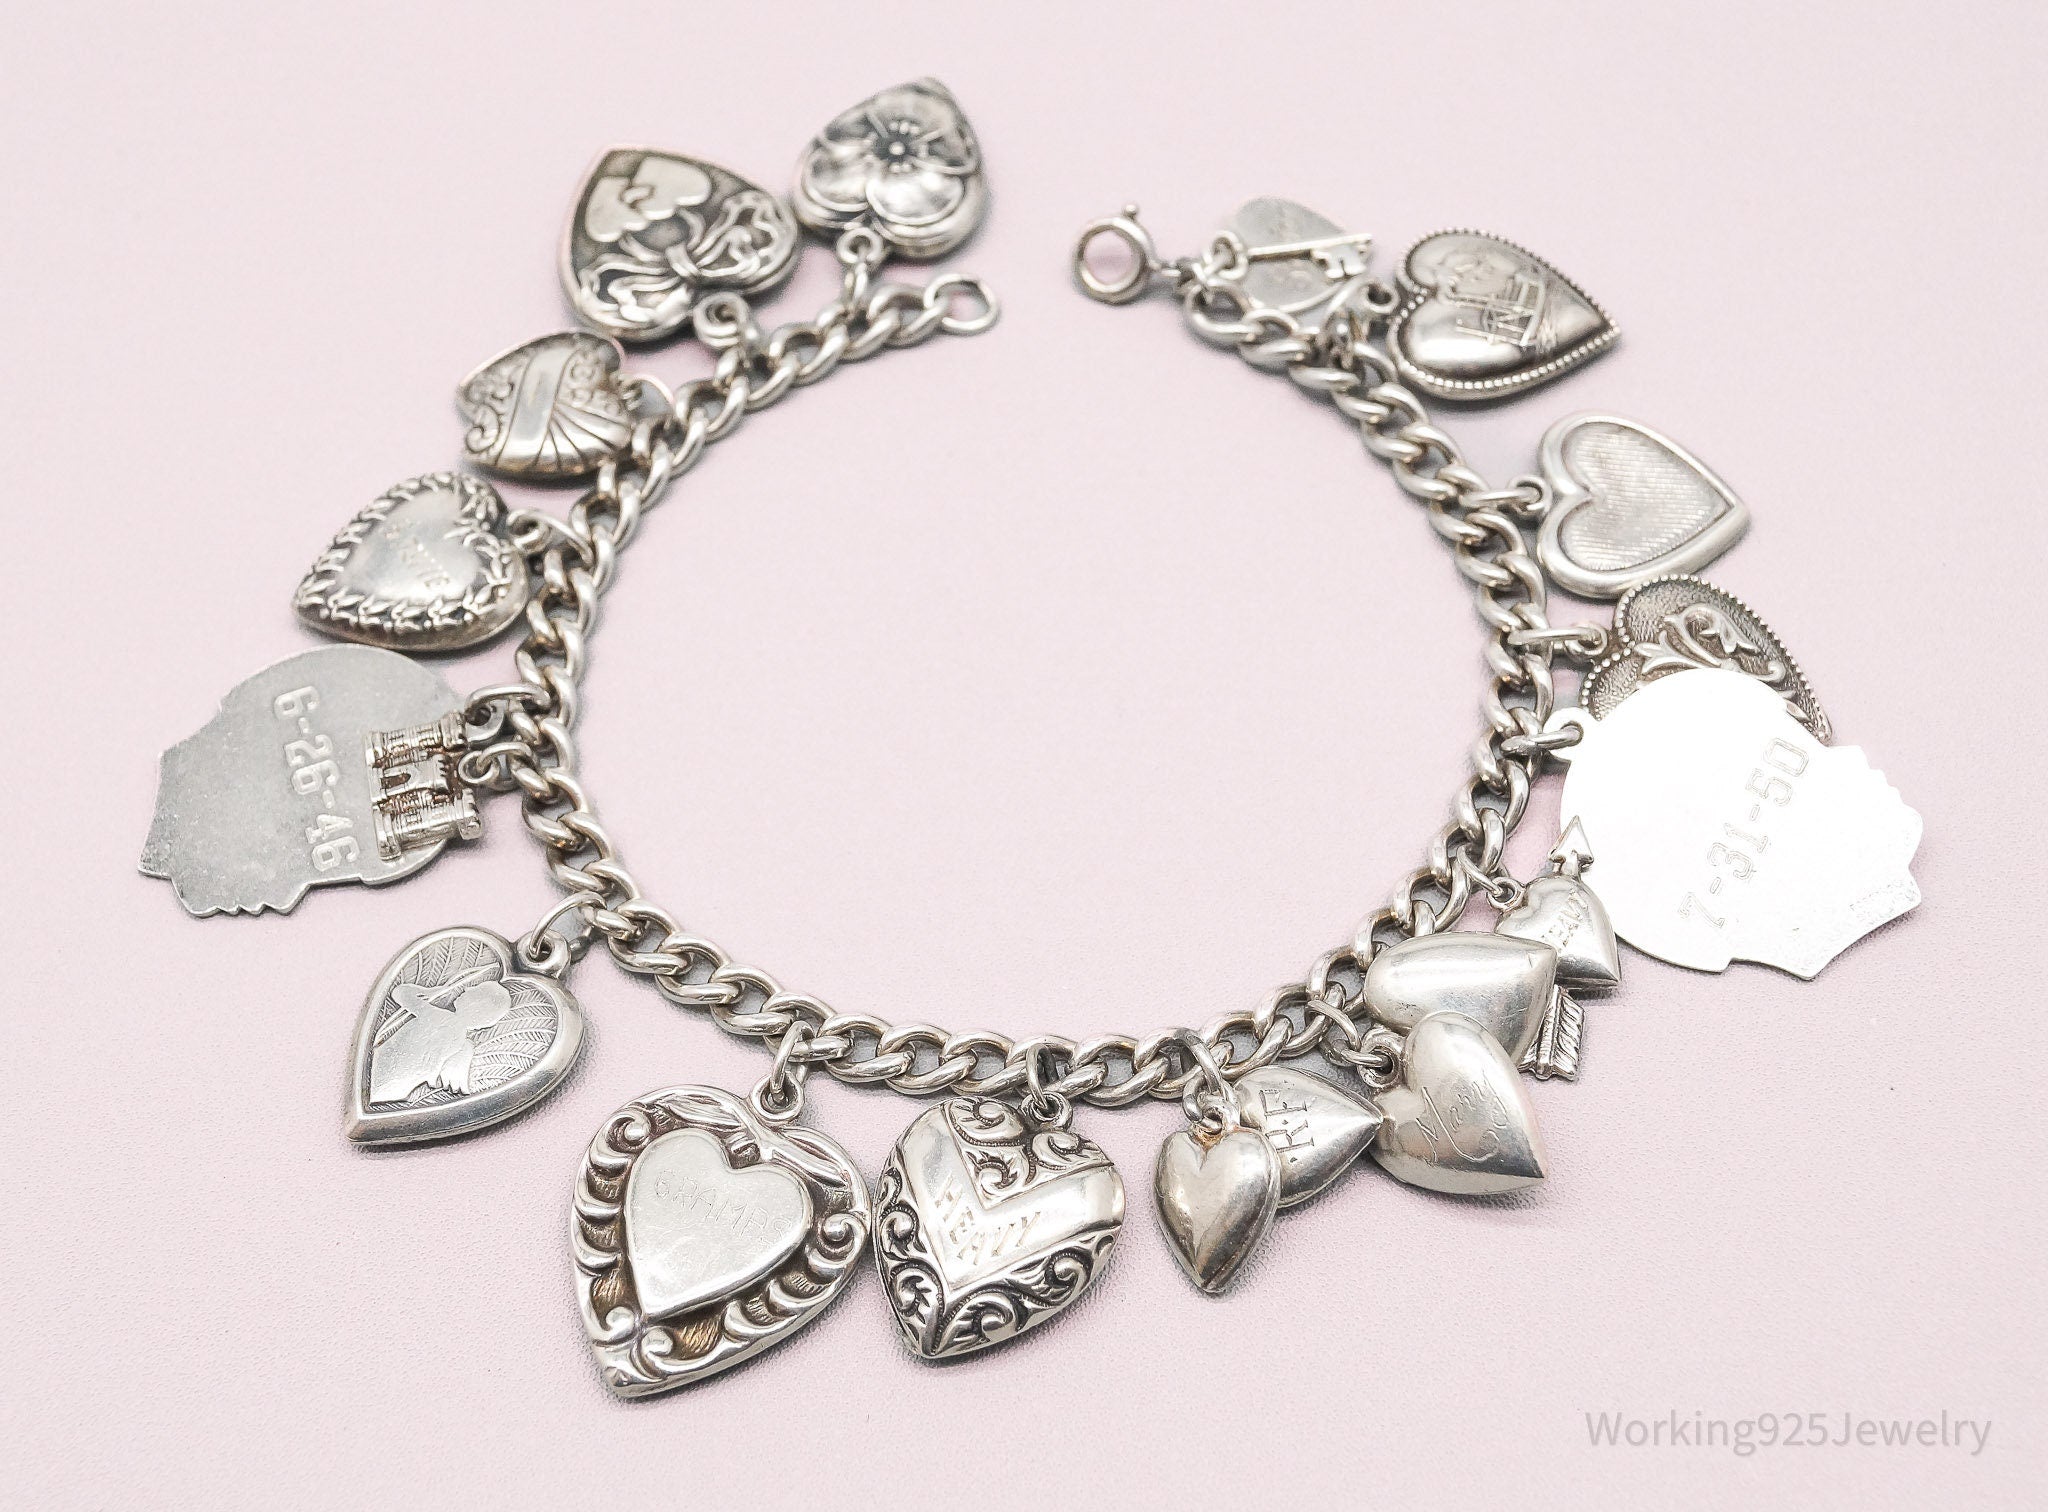 Antique Vintage Puffy Hearts Charms Sterling Silver Charm Bracelet